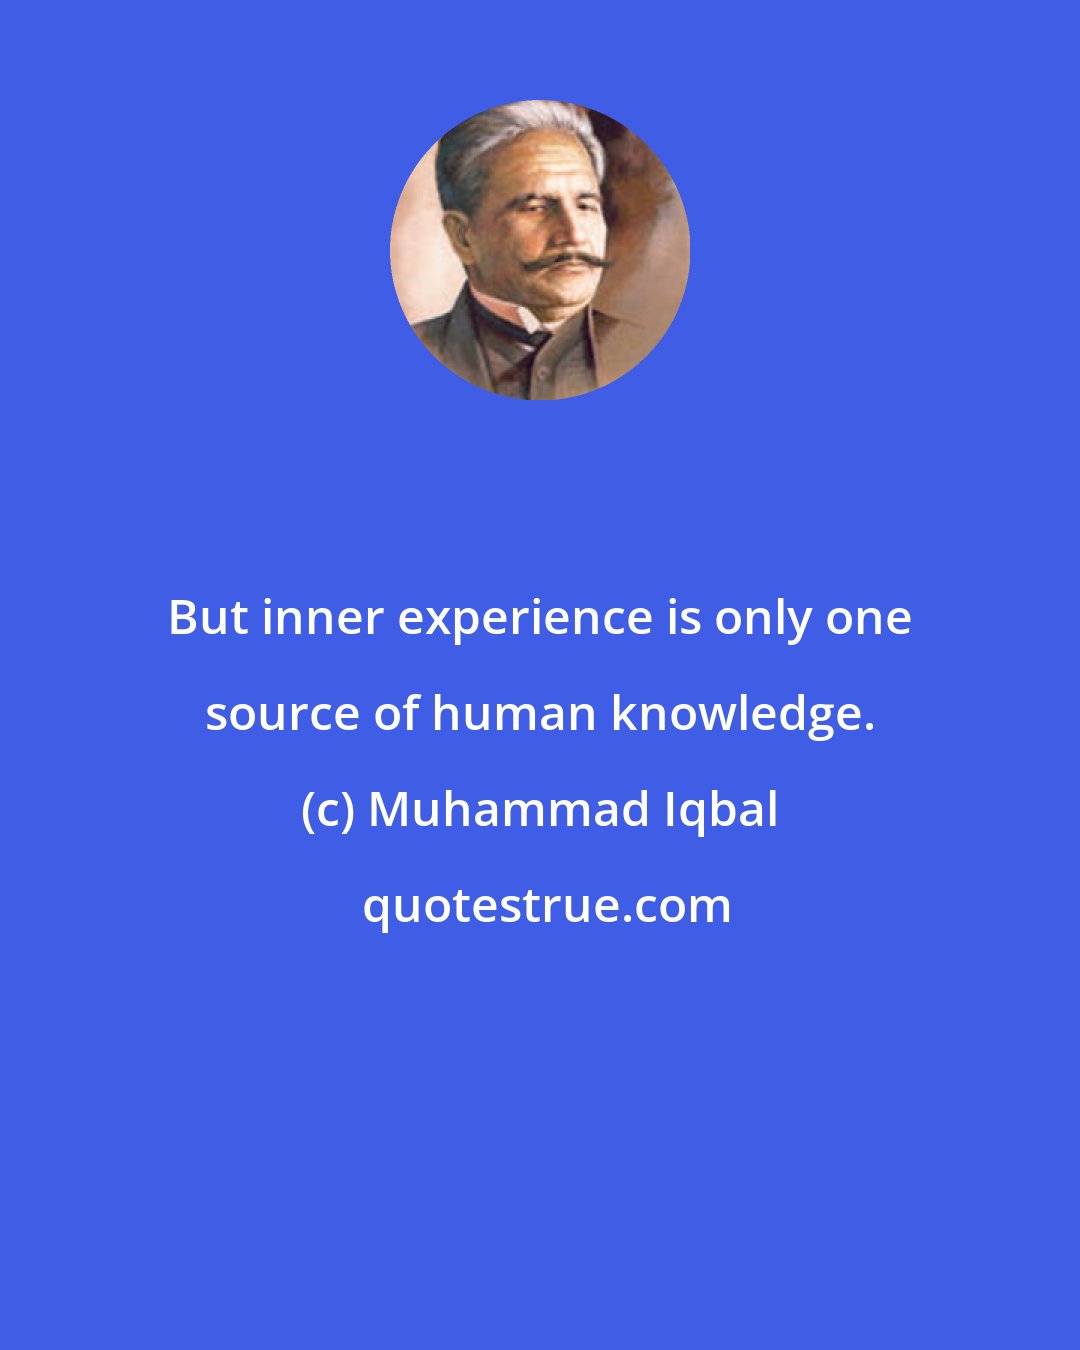 Muhammad Iqbal: But inner experience is only one source of human knowledge.